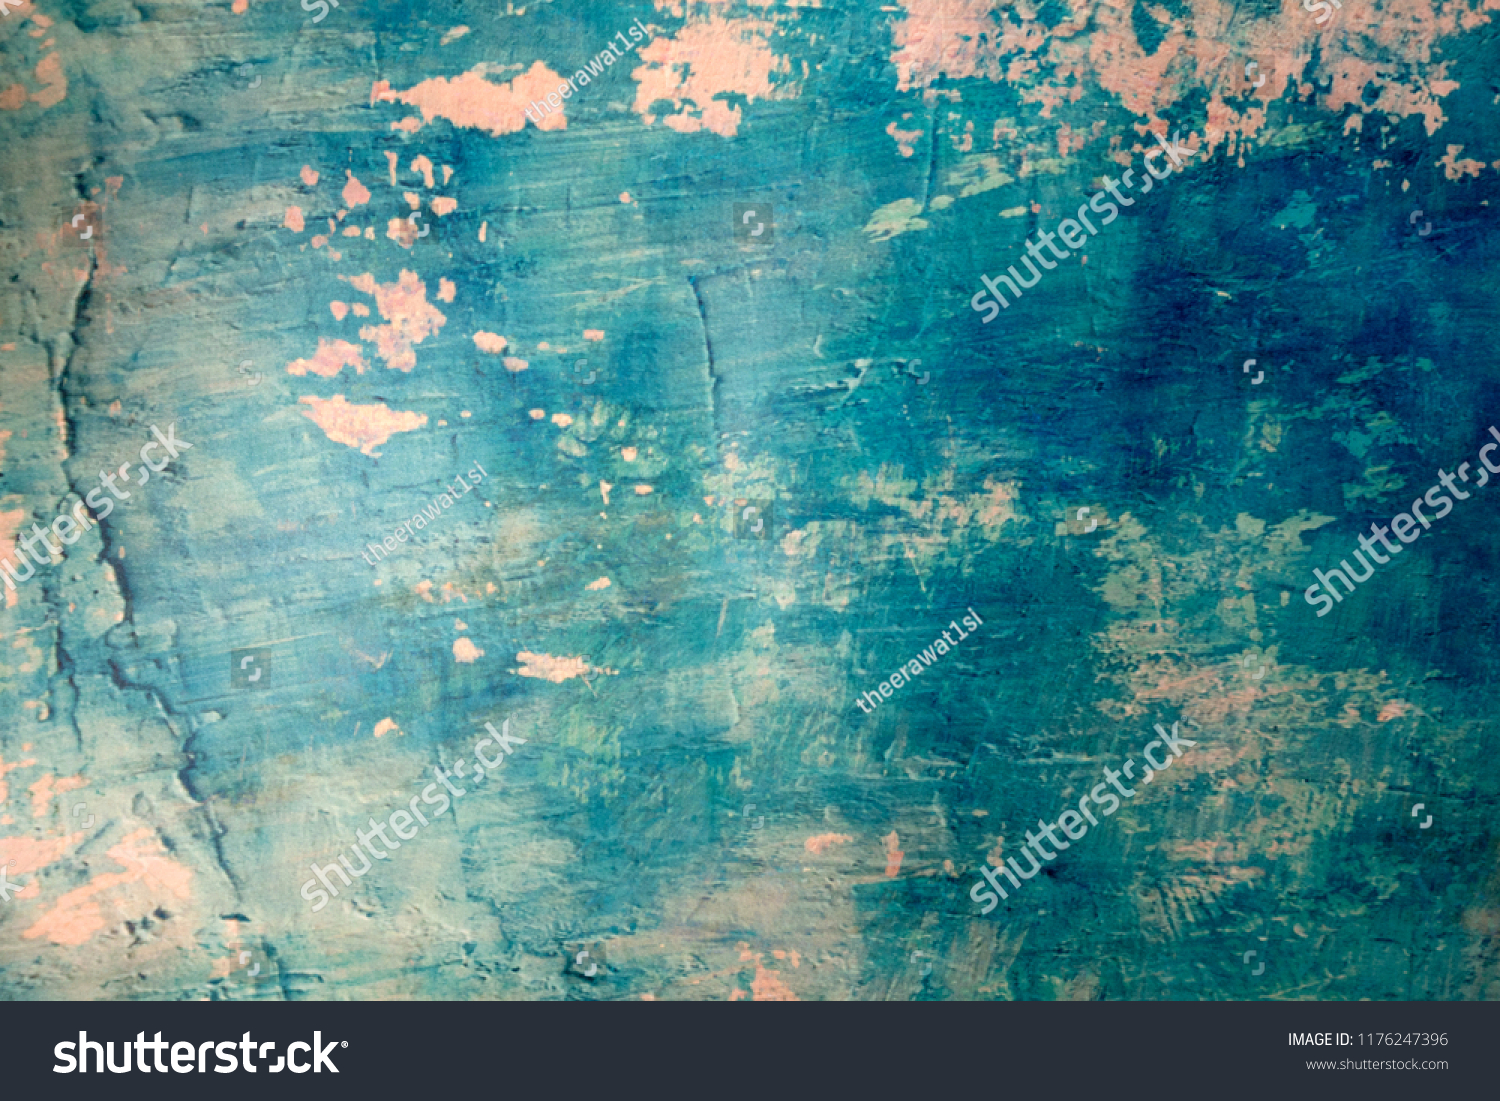 Blue Navy Blue Dark Abstract Background Grunge Decorative Stucco Wall of Art Rough. Texture Banner With Space Text. #1176247396